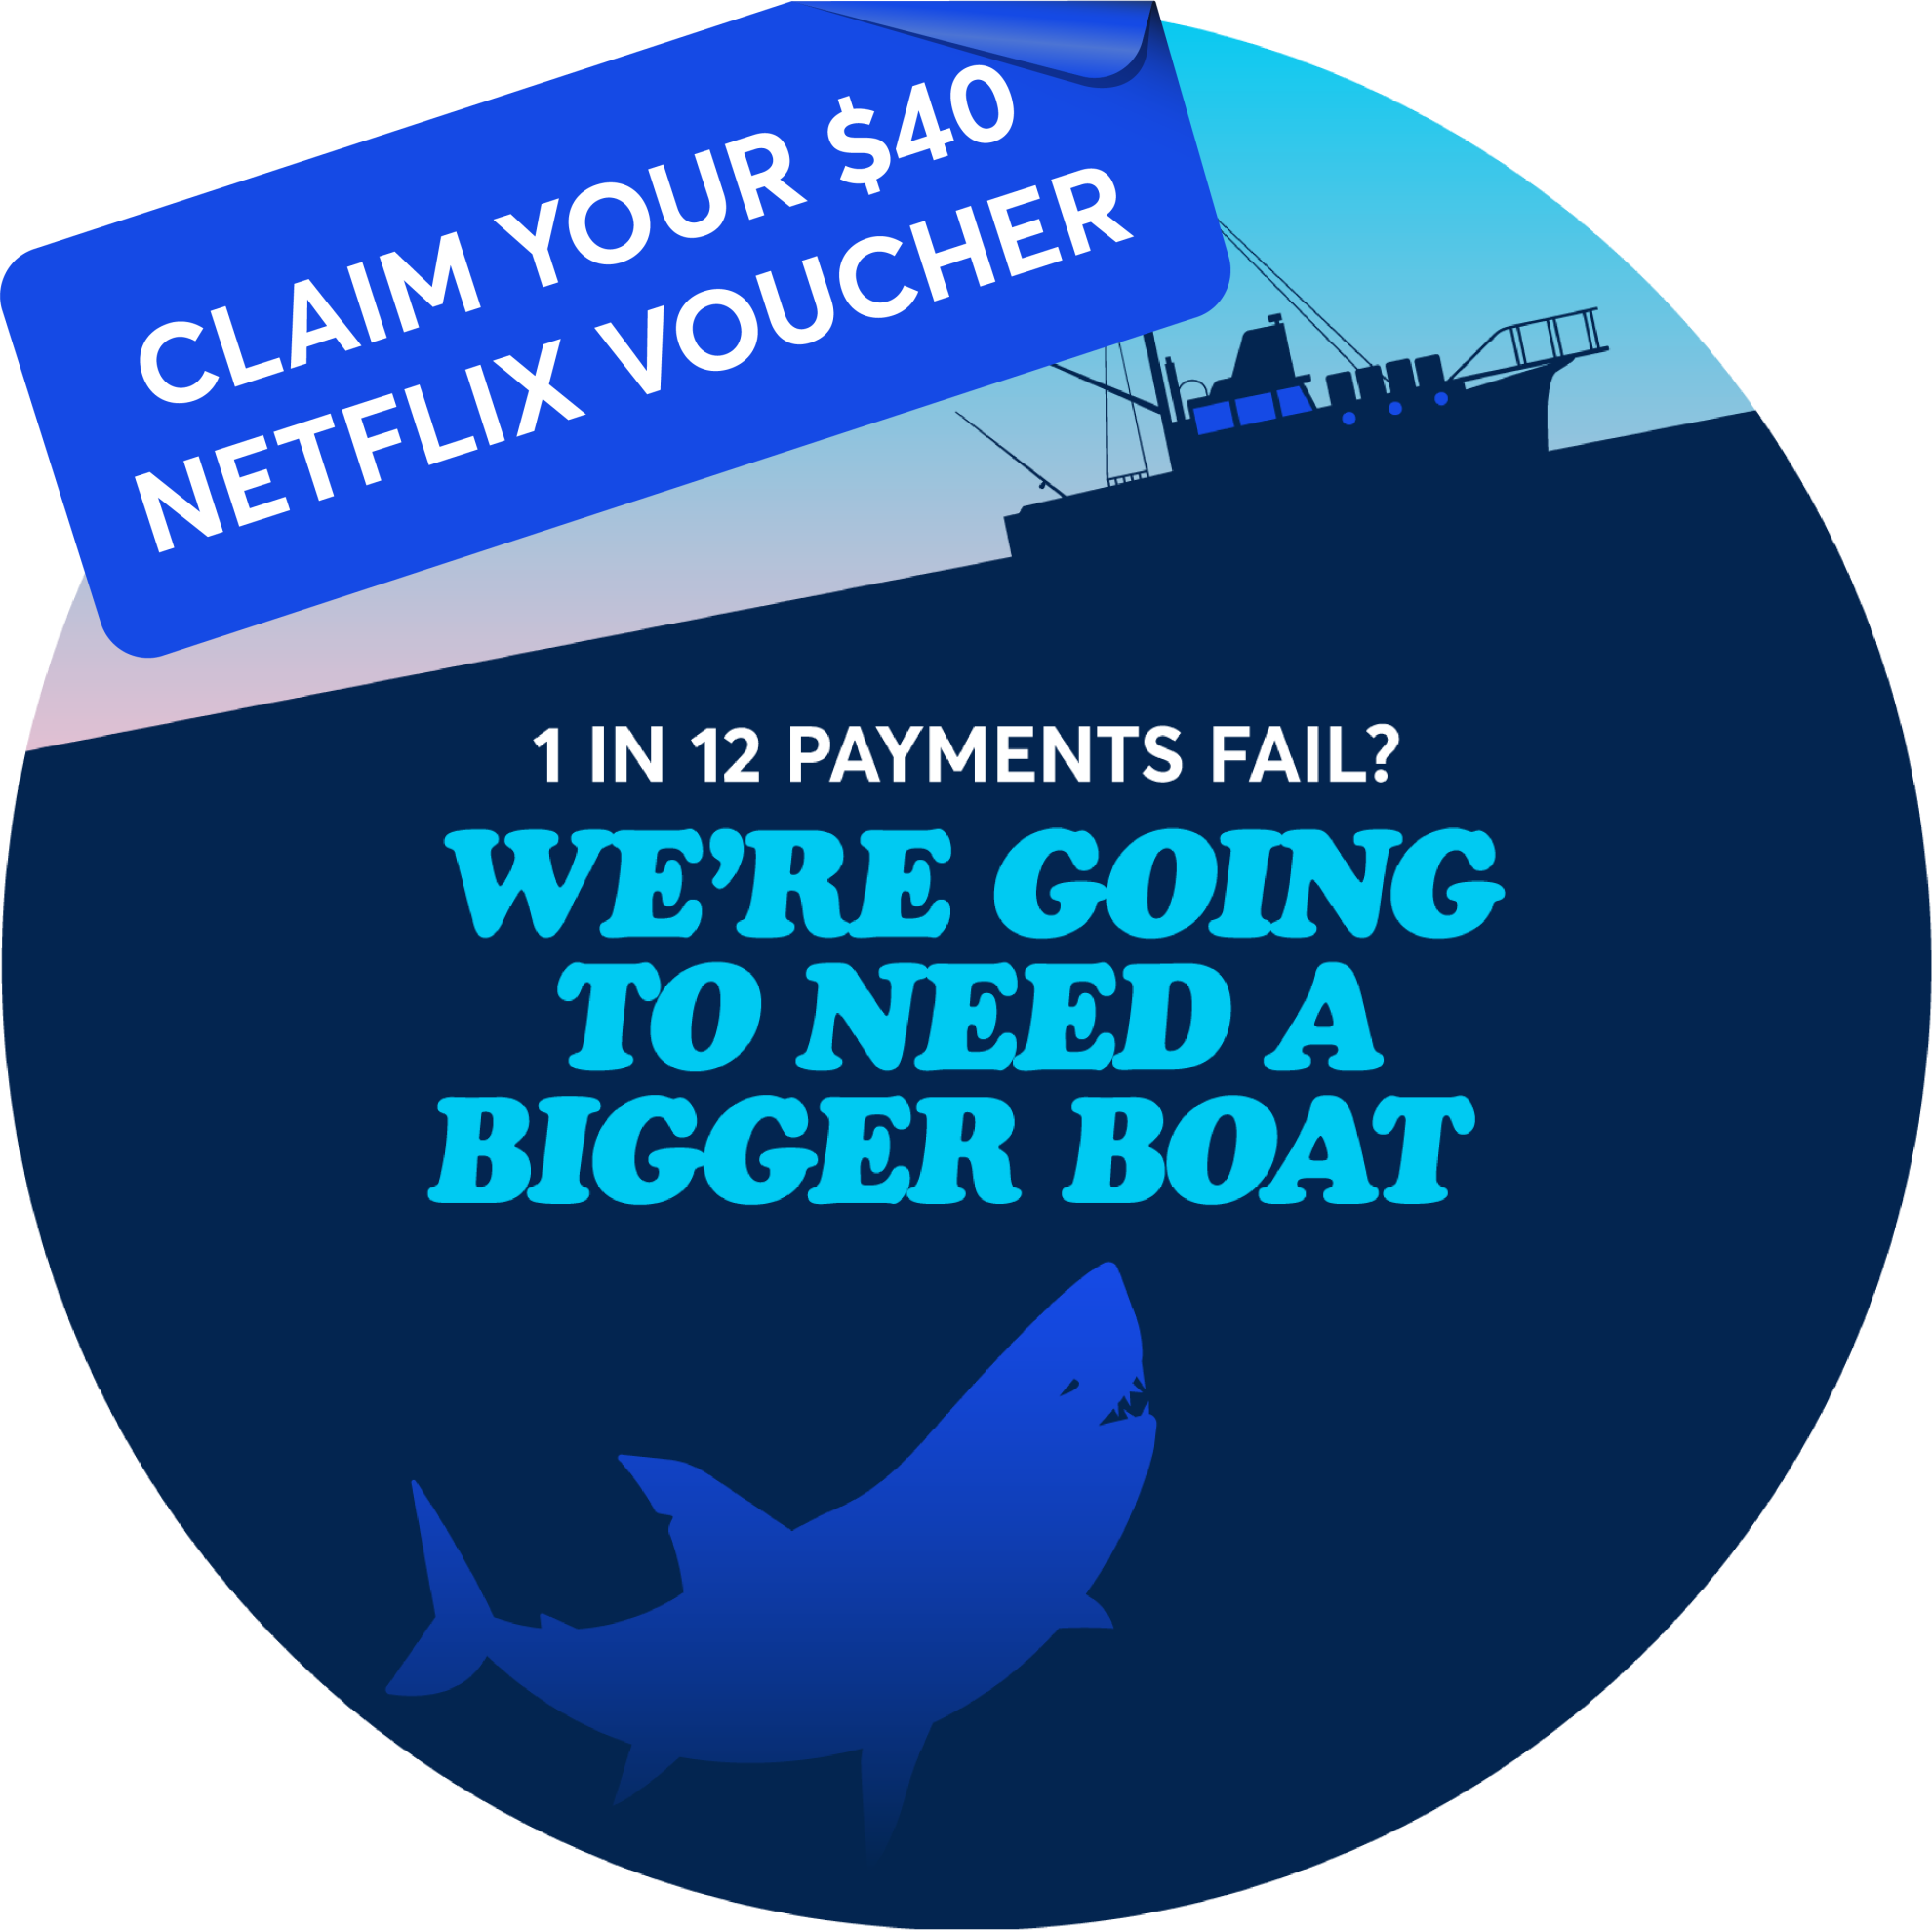 Save yourself from the jaws of failed payments 